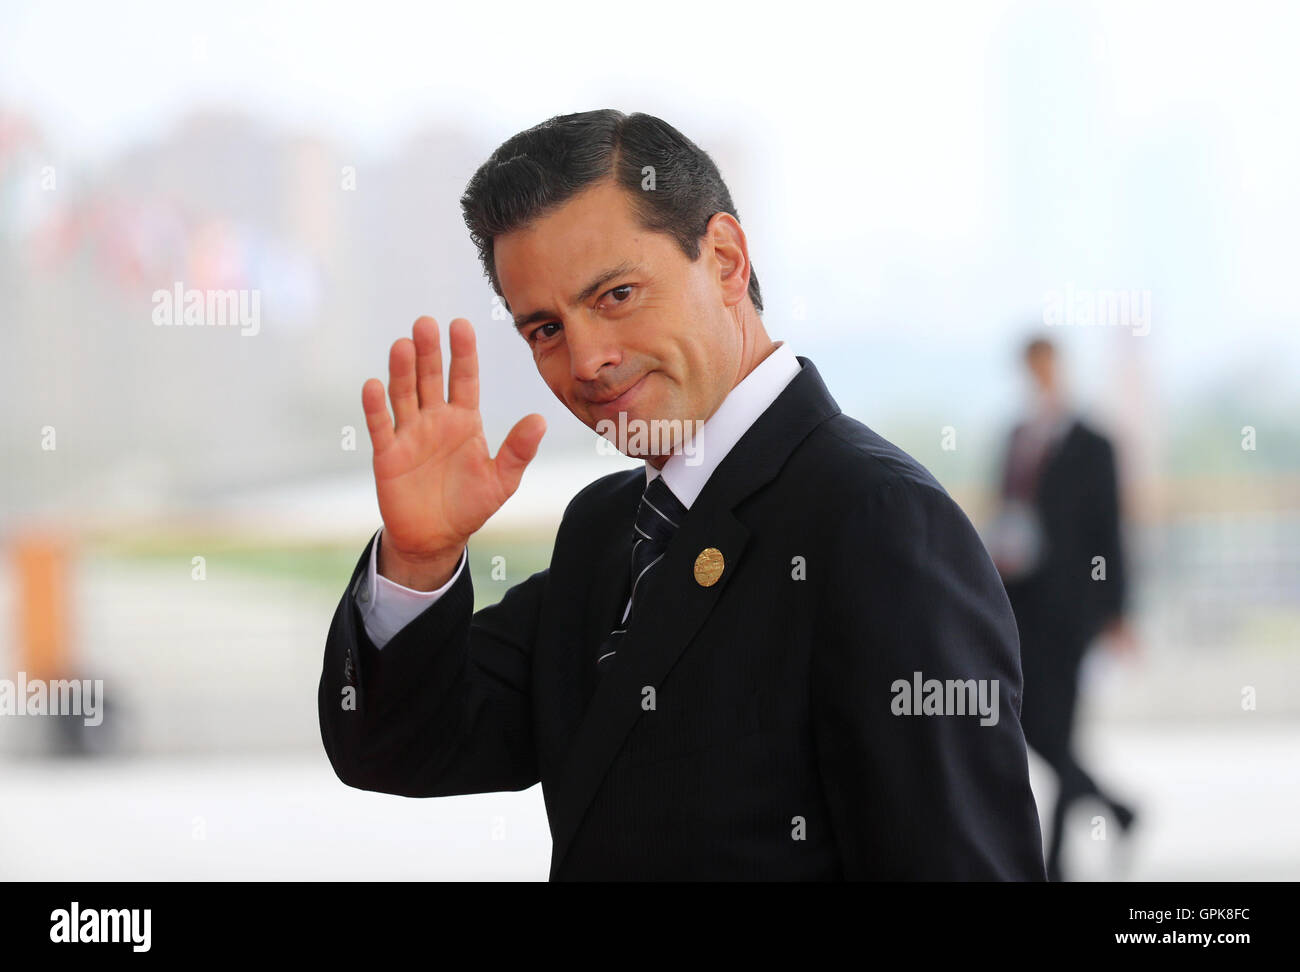 (160904) -- HANGZHOU, Sept. 4, 2016 (Xinhua) -- Mexican President Enrique Pena Nieto arrives at Hangzhou International Expo Center to attend the G20 summit in Hangzhou, capital of east China's Zhejiang Province, Sept. 4, 2016. The 11th G20 summit opened here on Sunday. (Xinhua/Xing Guangli)(mcg) Stock Photo